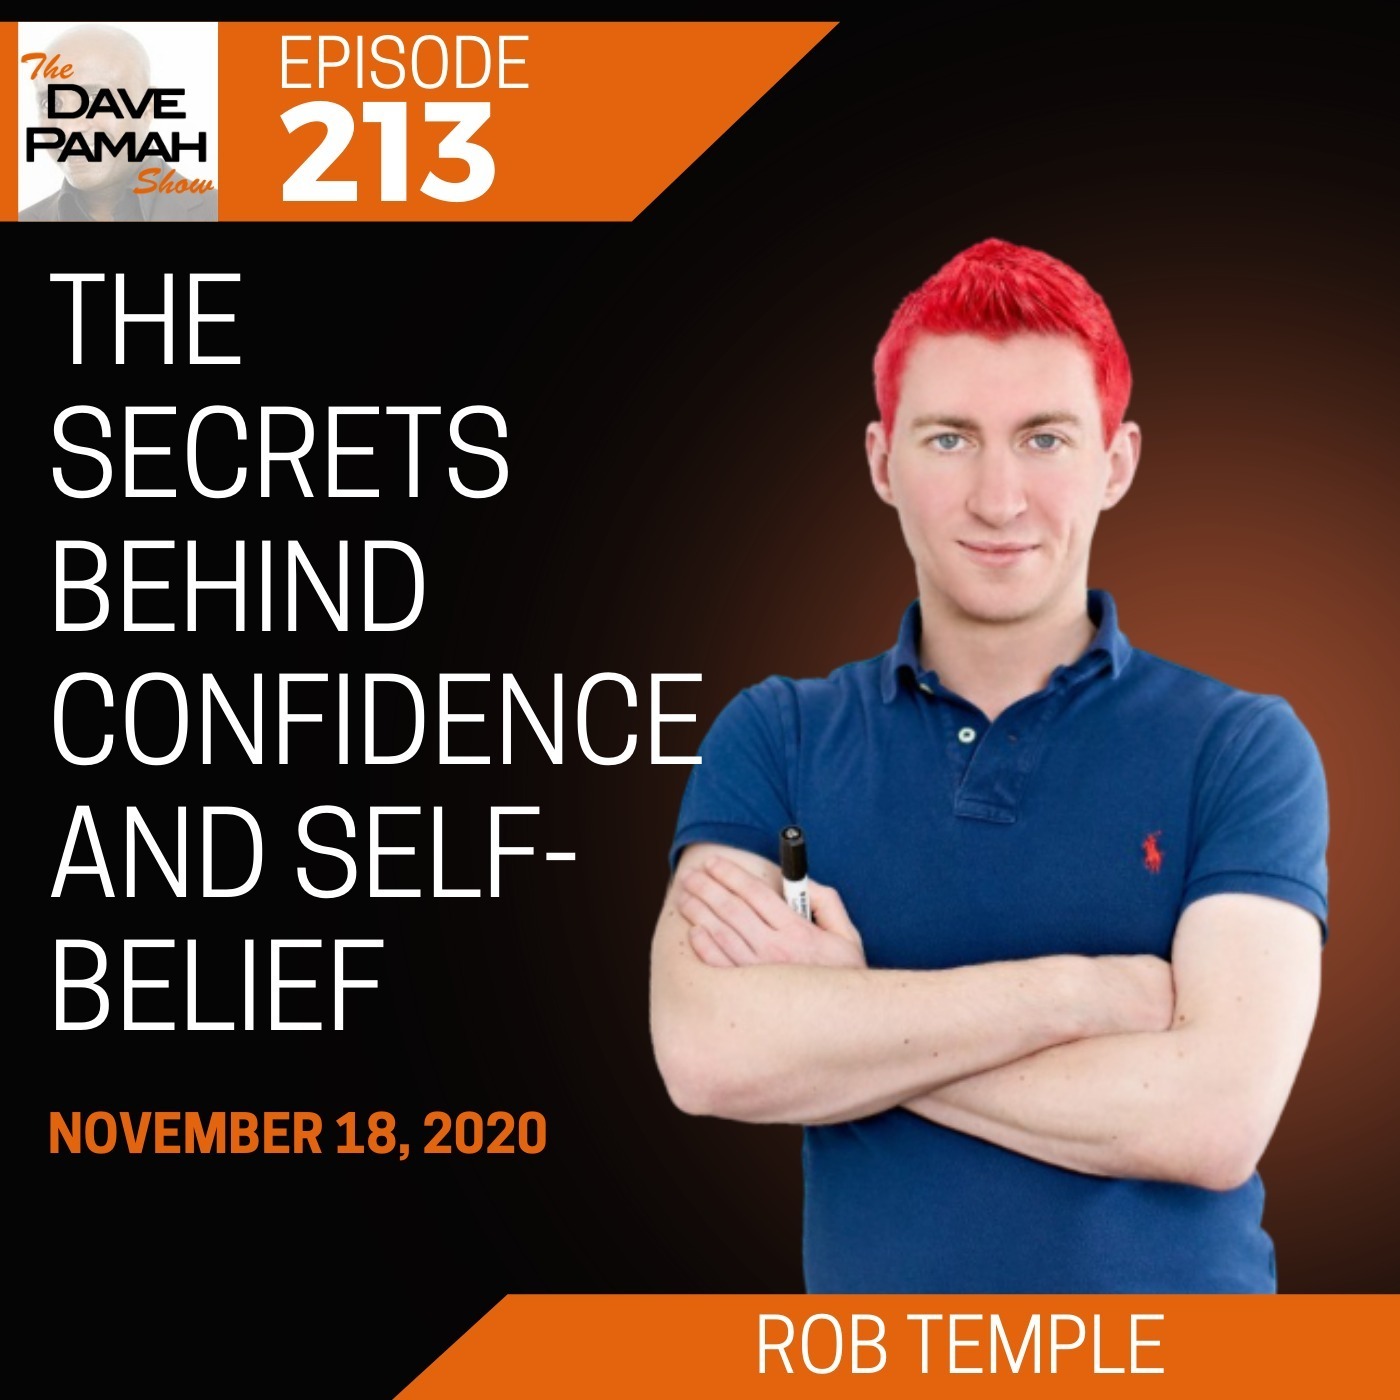 The secrets behind confidence and self-belief with Rob Temple